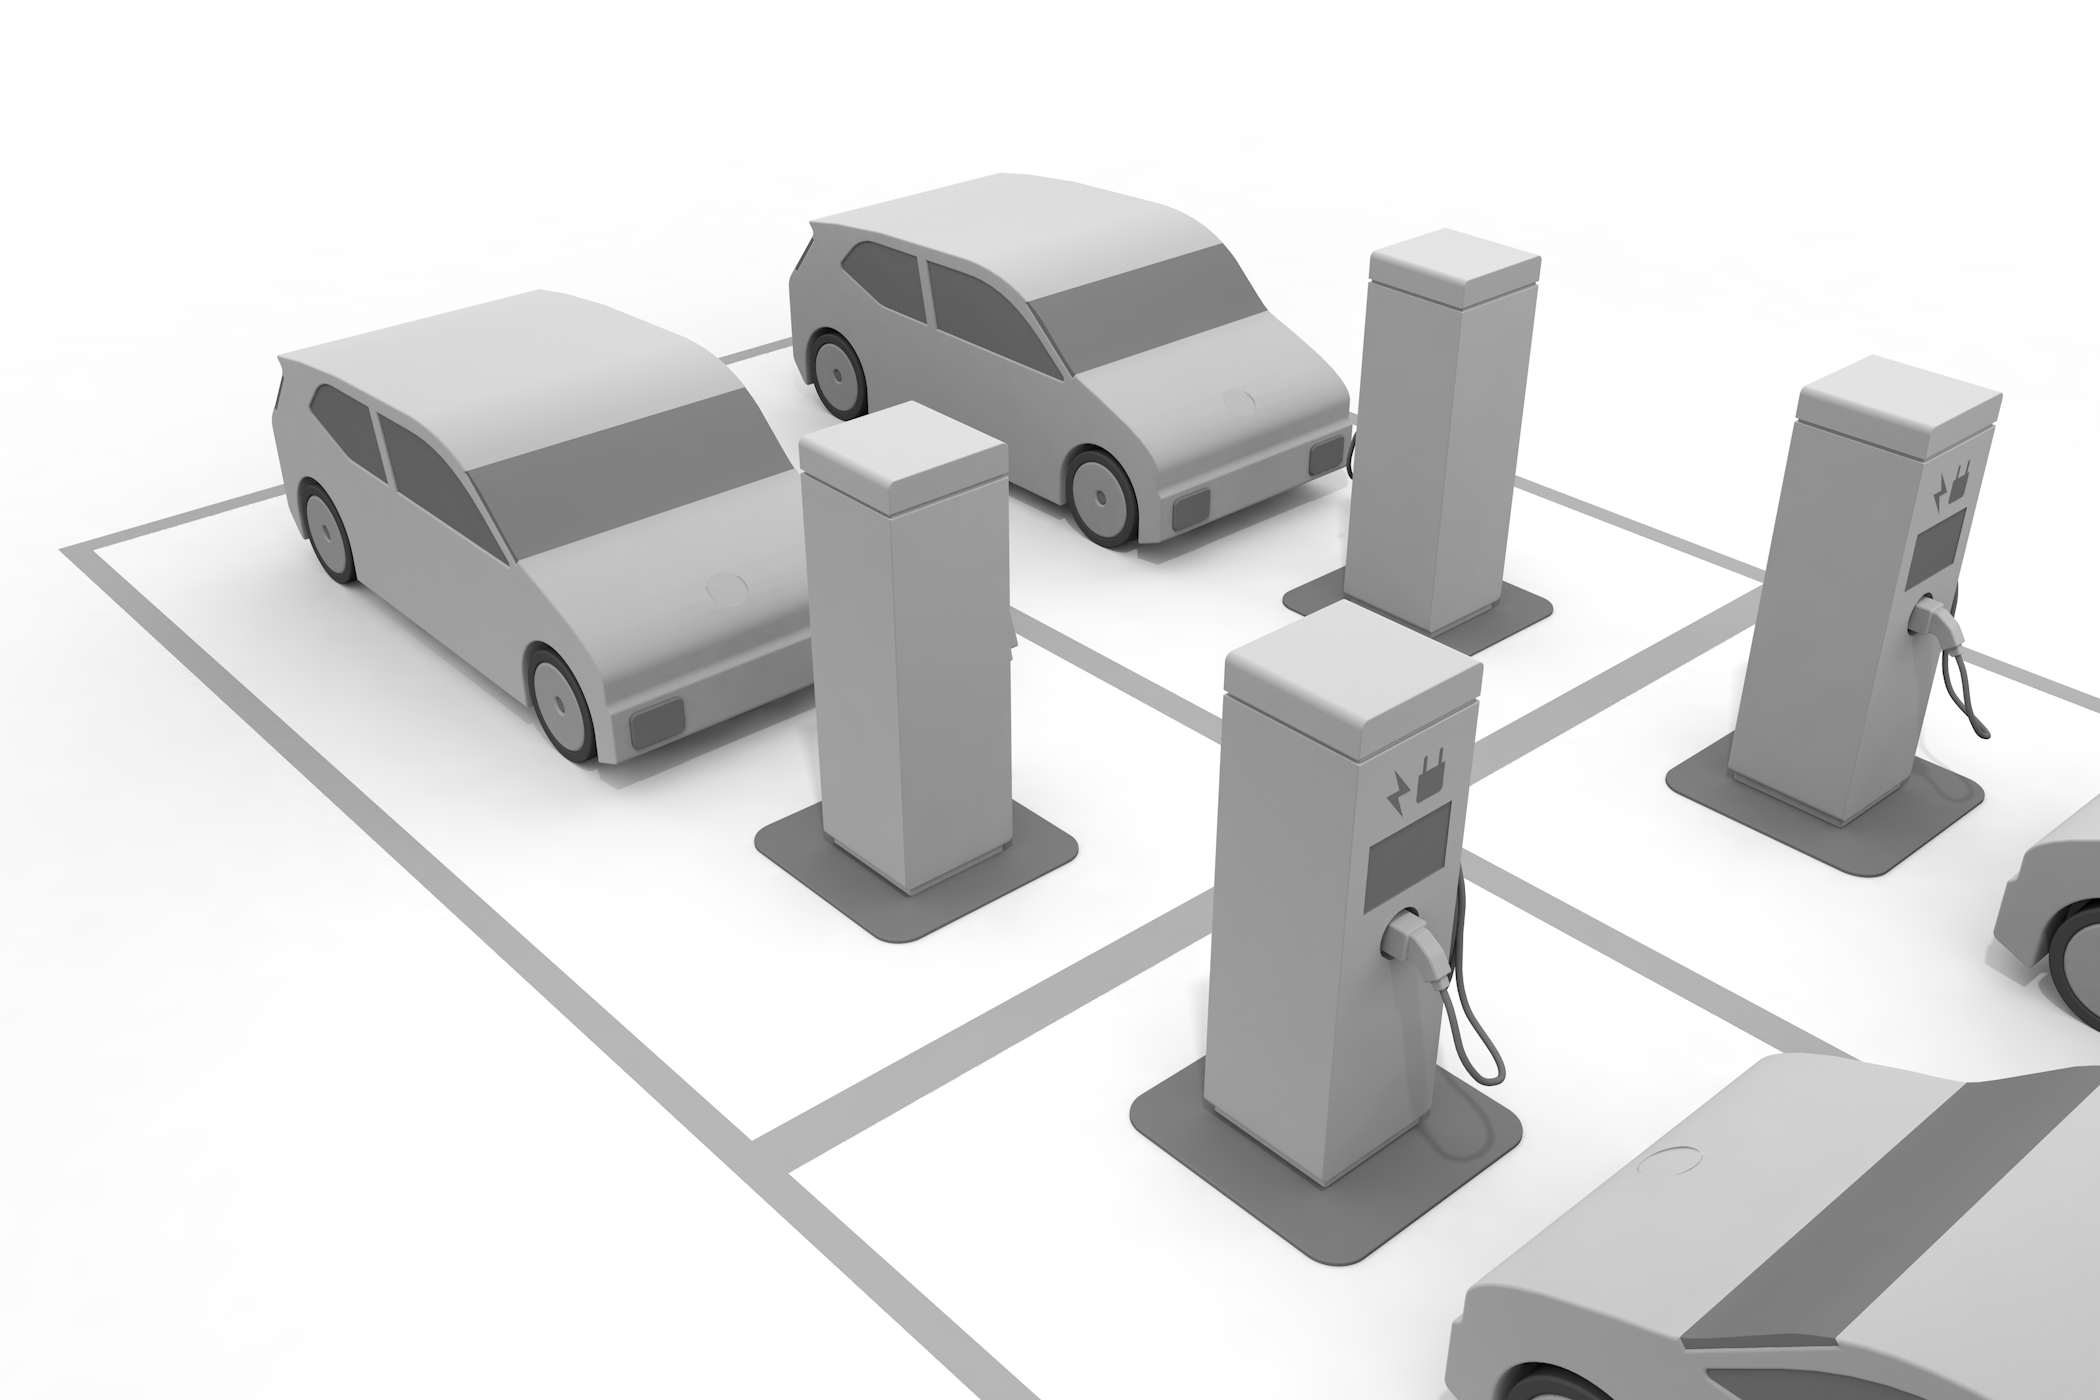 Lithium / In-vehicle / Battery / Charging / Highway / Highway-Illustration / 3D rendering / Free material / Commercial use OK